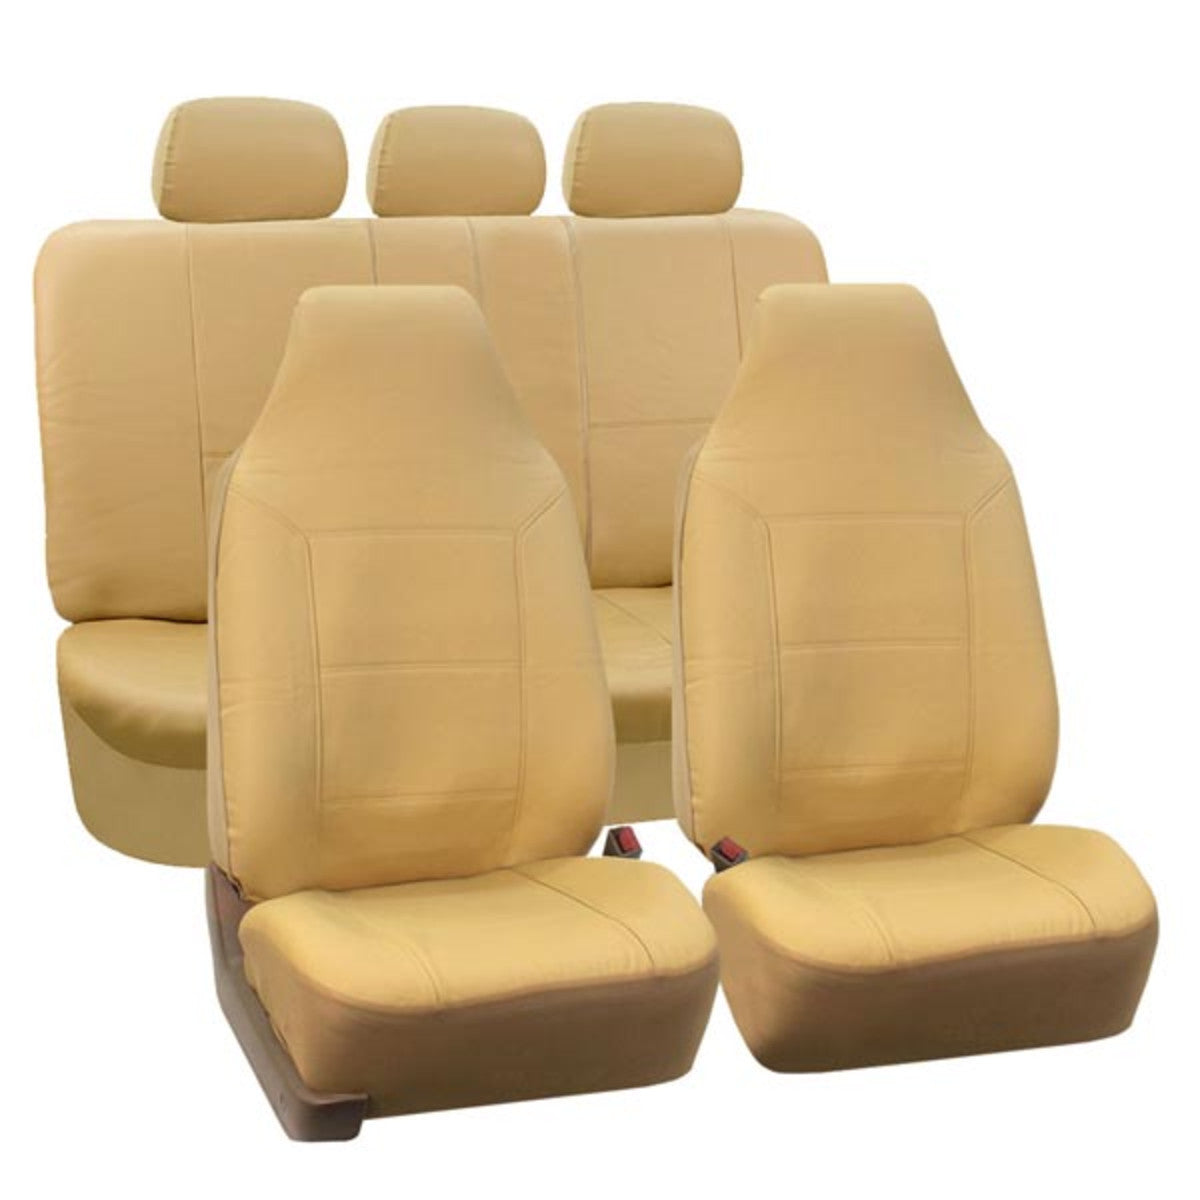 Royal PU Leather Seat Covers Full Set Beige